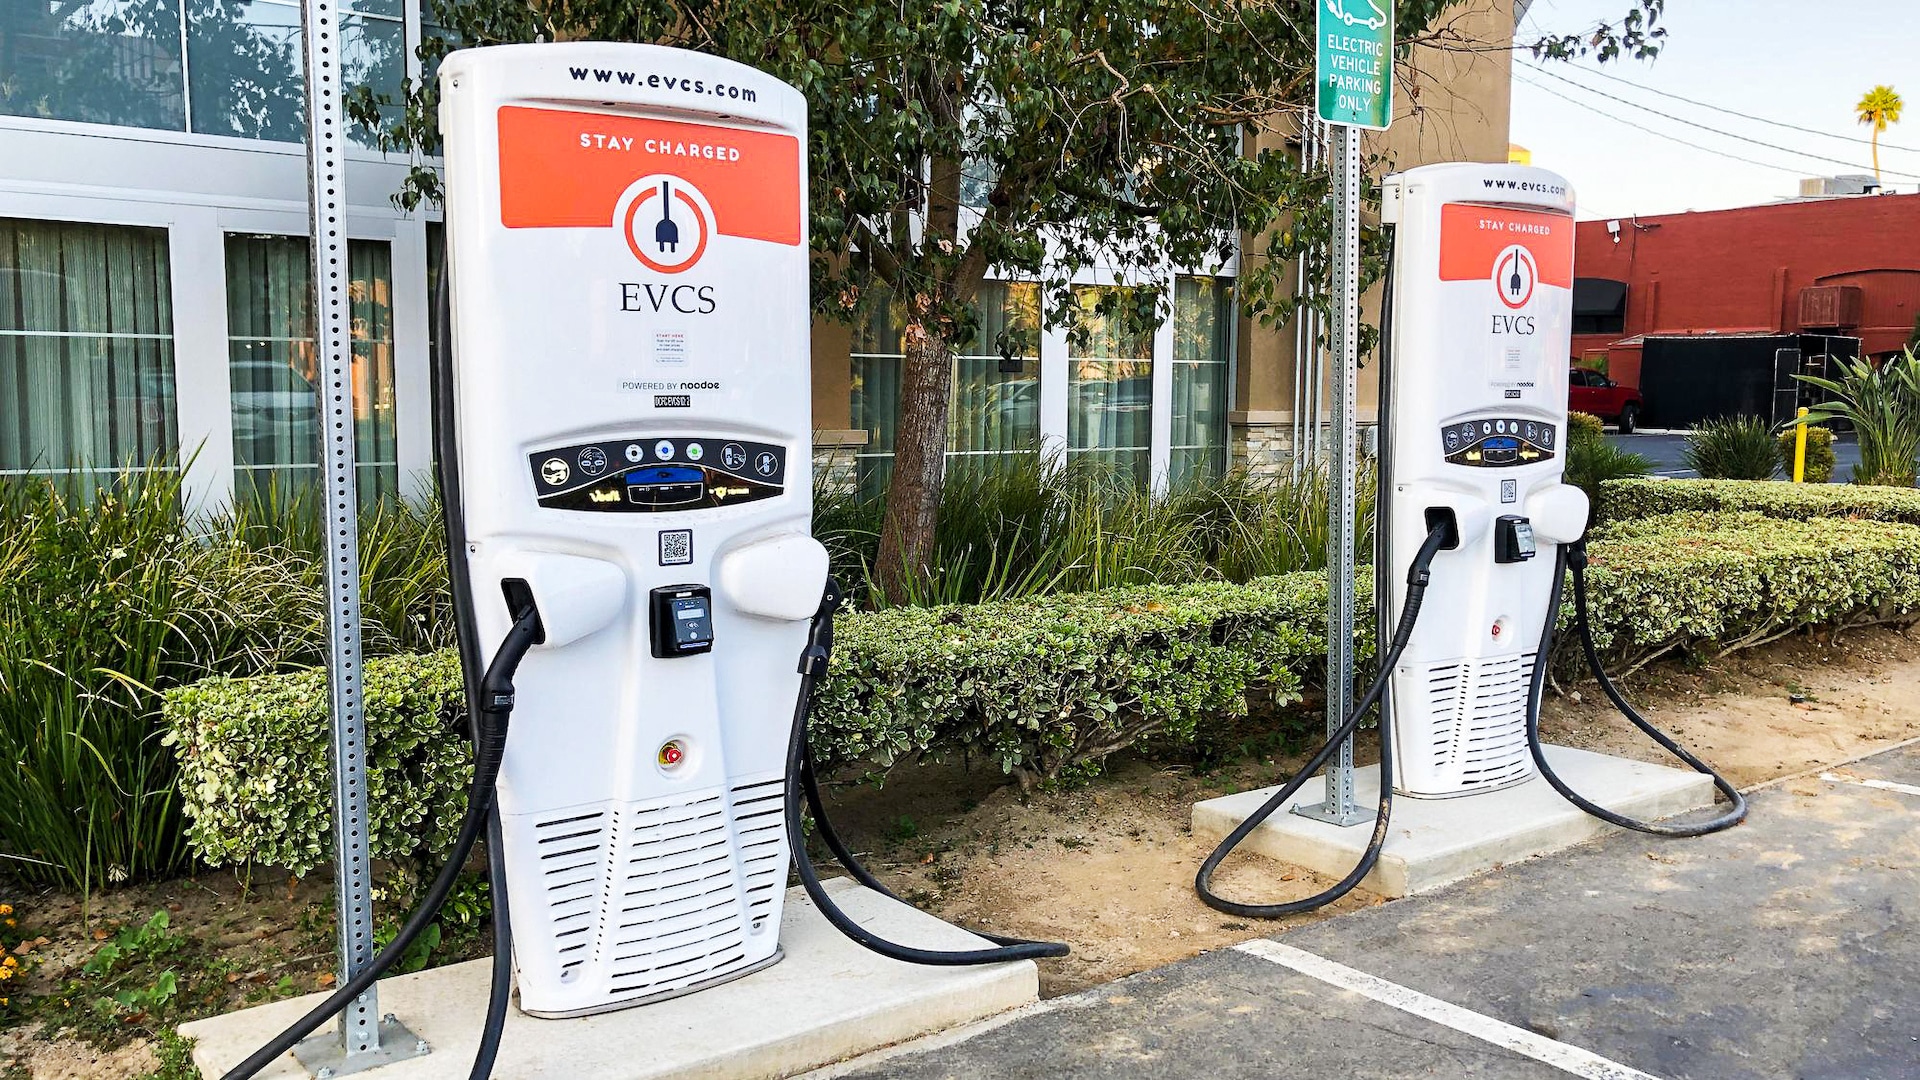 Tritium Collaborates With Fast Charging Network Operator EVCS to Deploy Over 500 New EV Fast Chargers